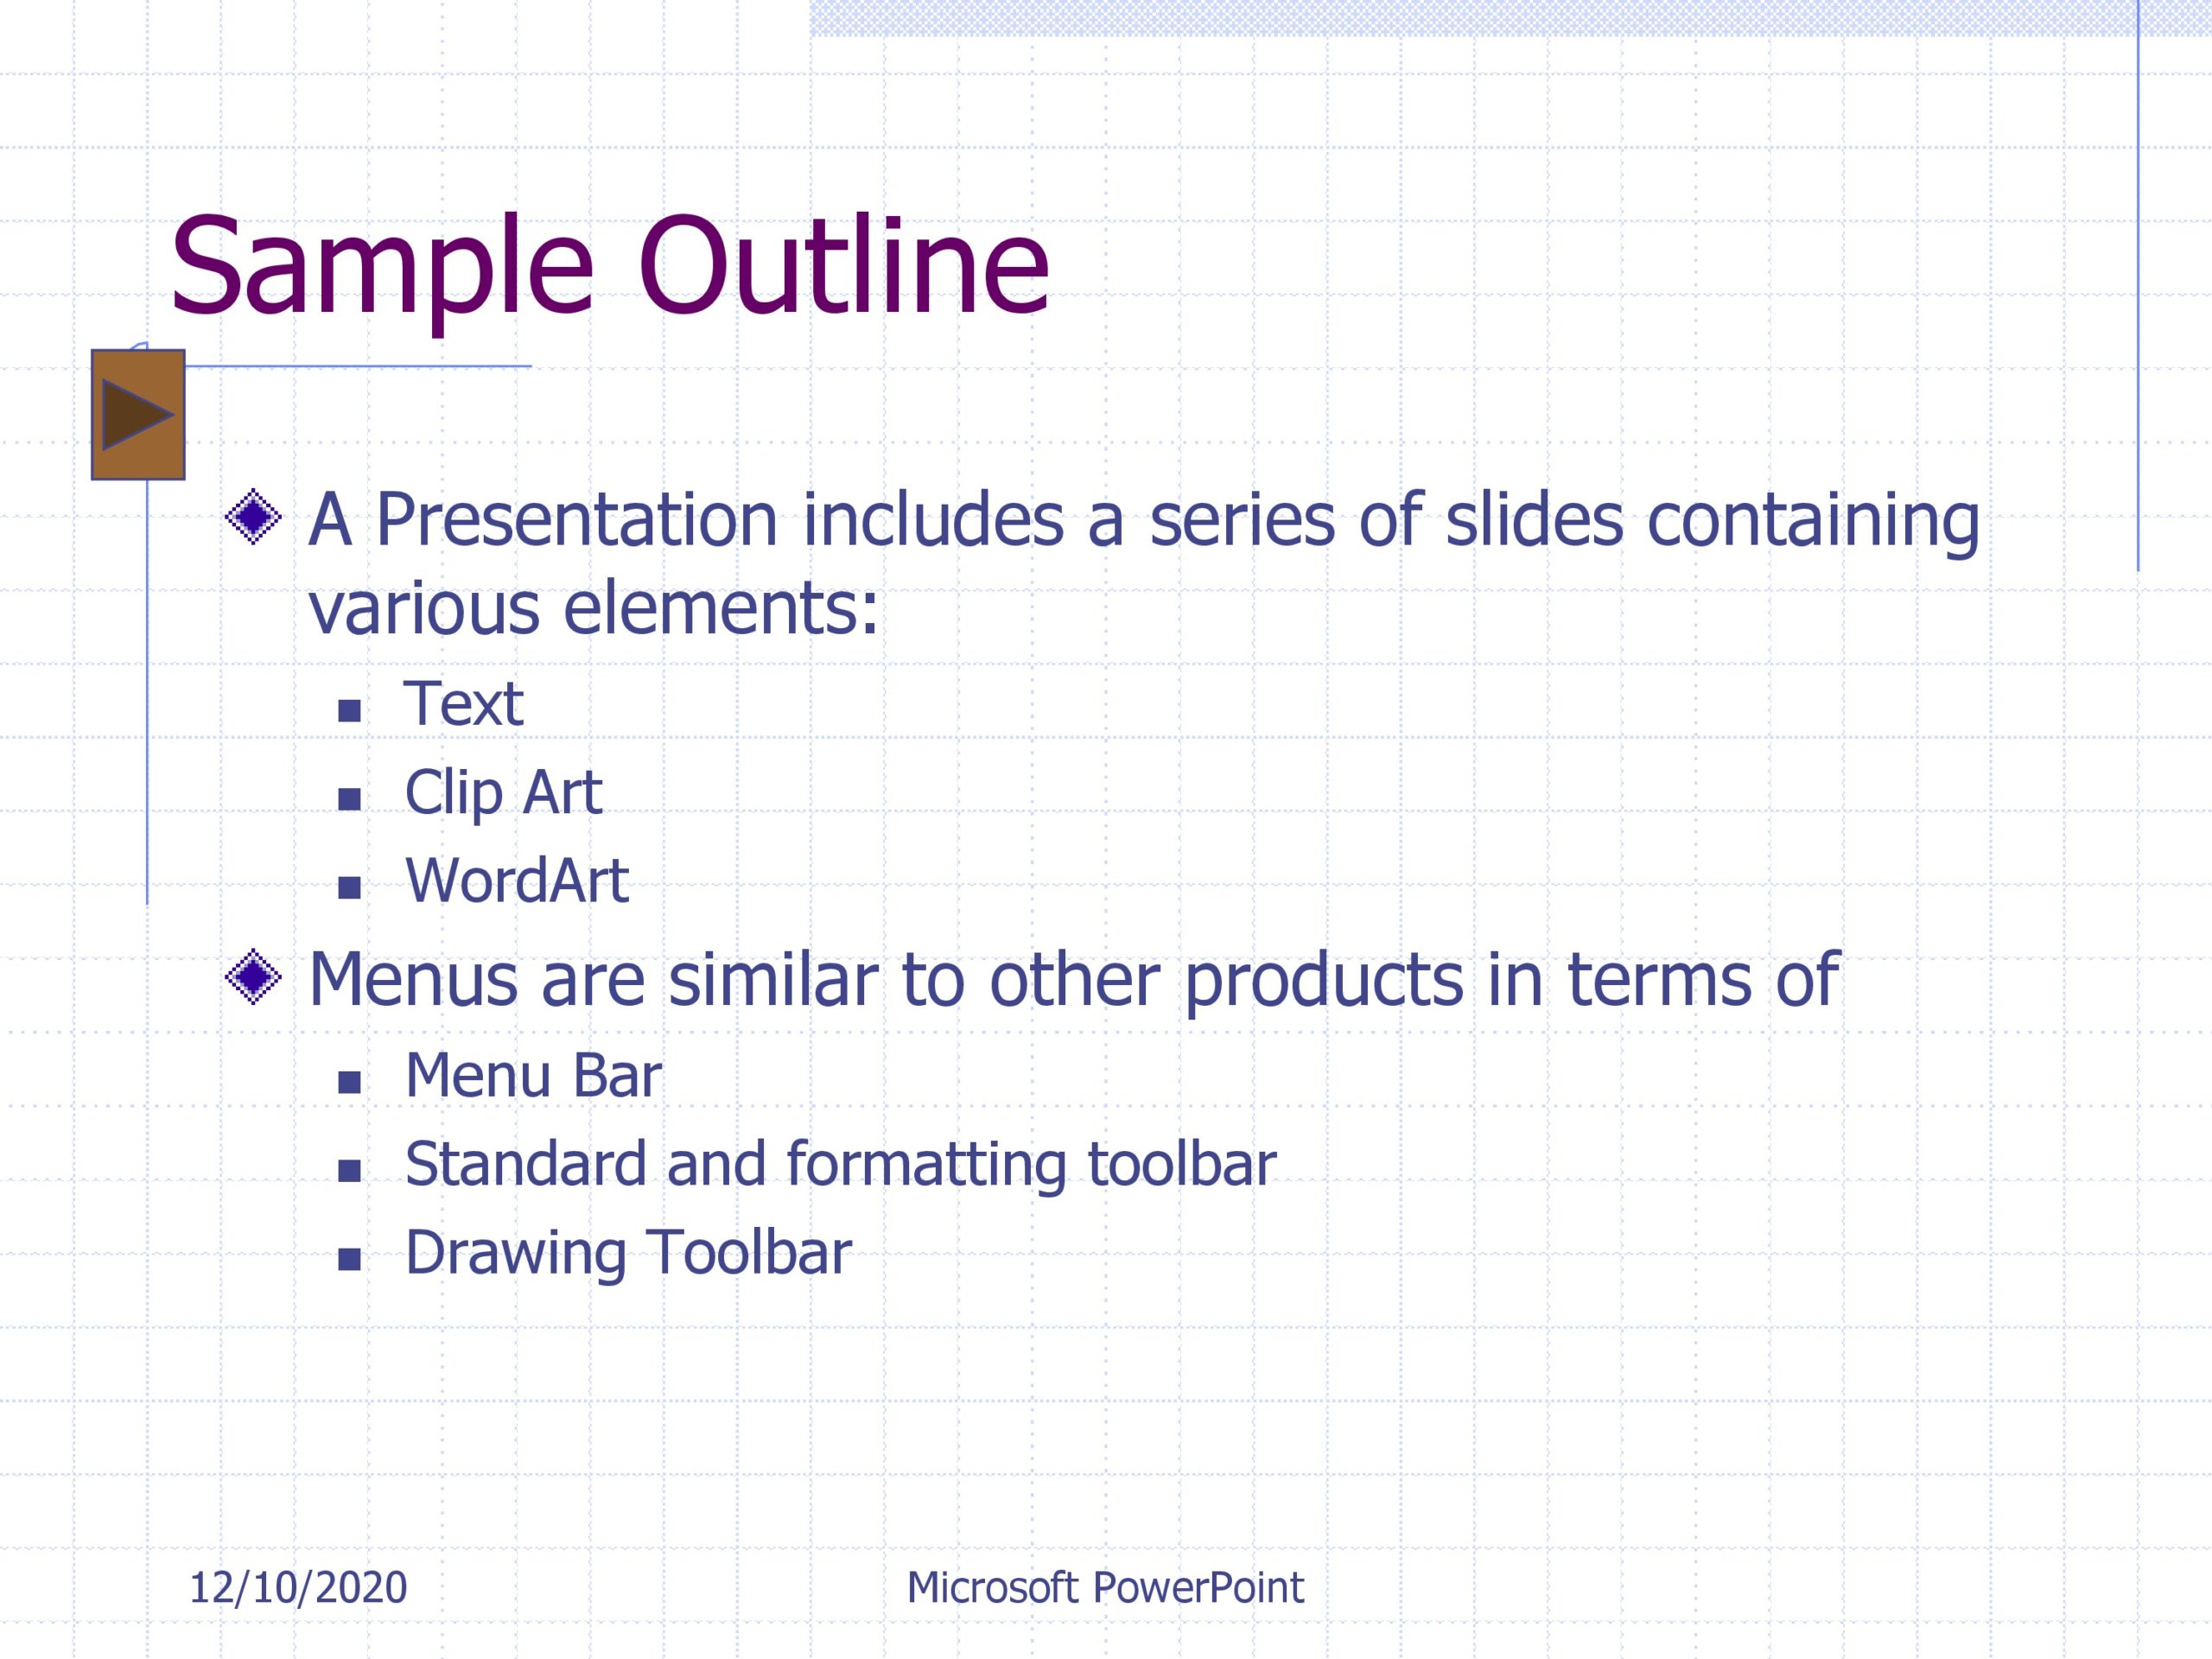 30 Perfect Presentation Outline Templates (+Examples)